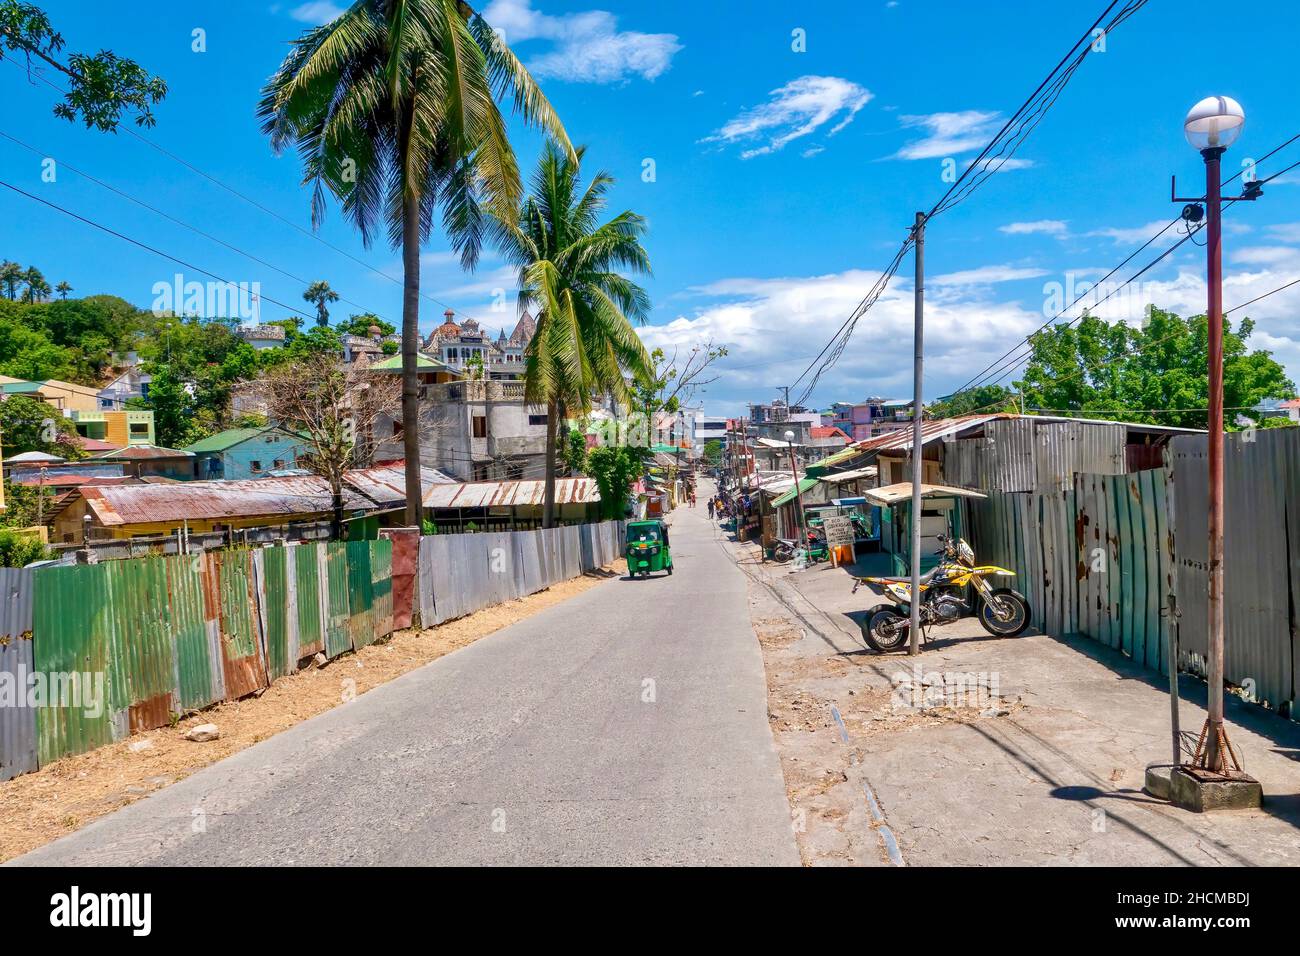 Sabang Village, Puerto Galera, Philippines - May 4, 2021: A narrow road lined with corrugated metal sheeting and simple buildings. Stock Photo